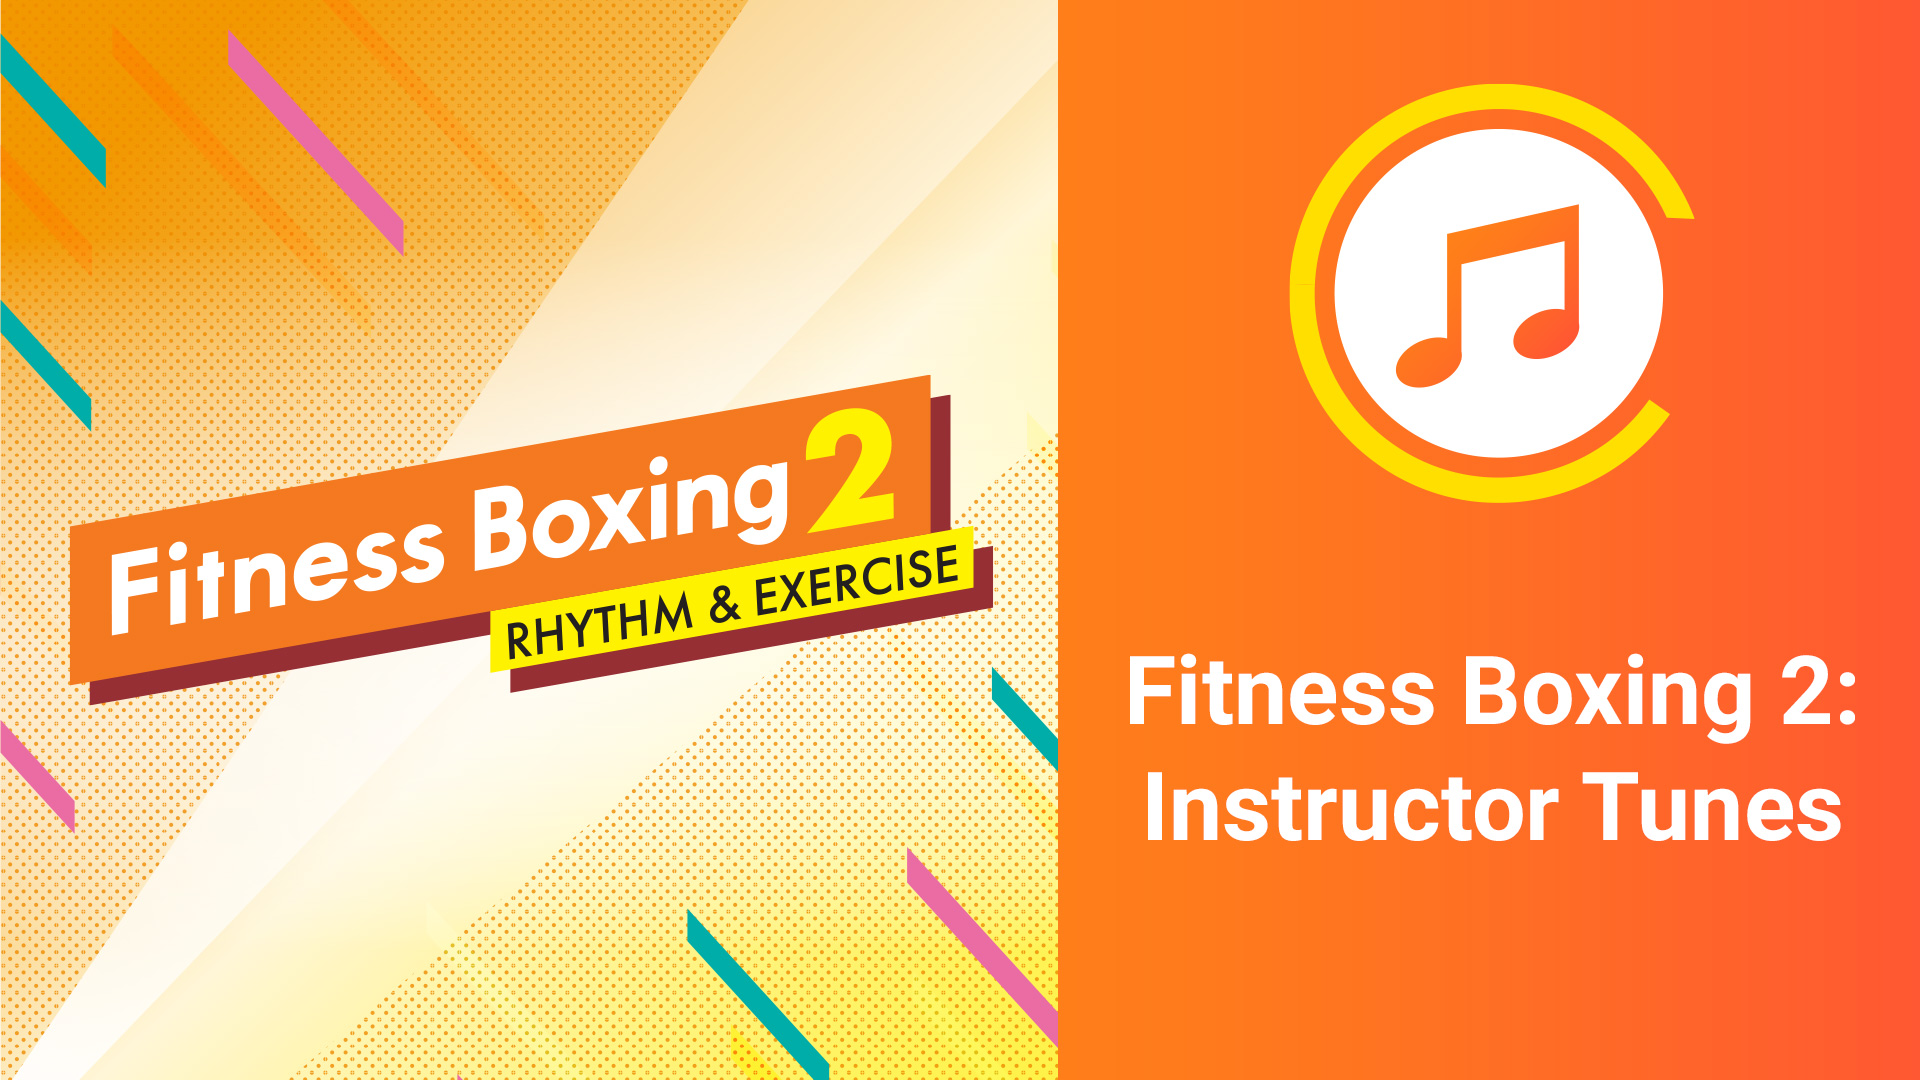 Fitness Boxing 2: Instructor Tunes